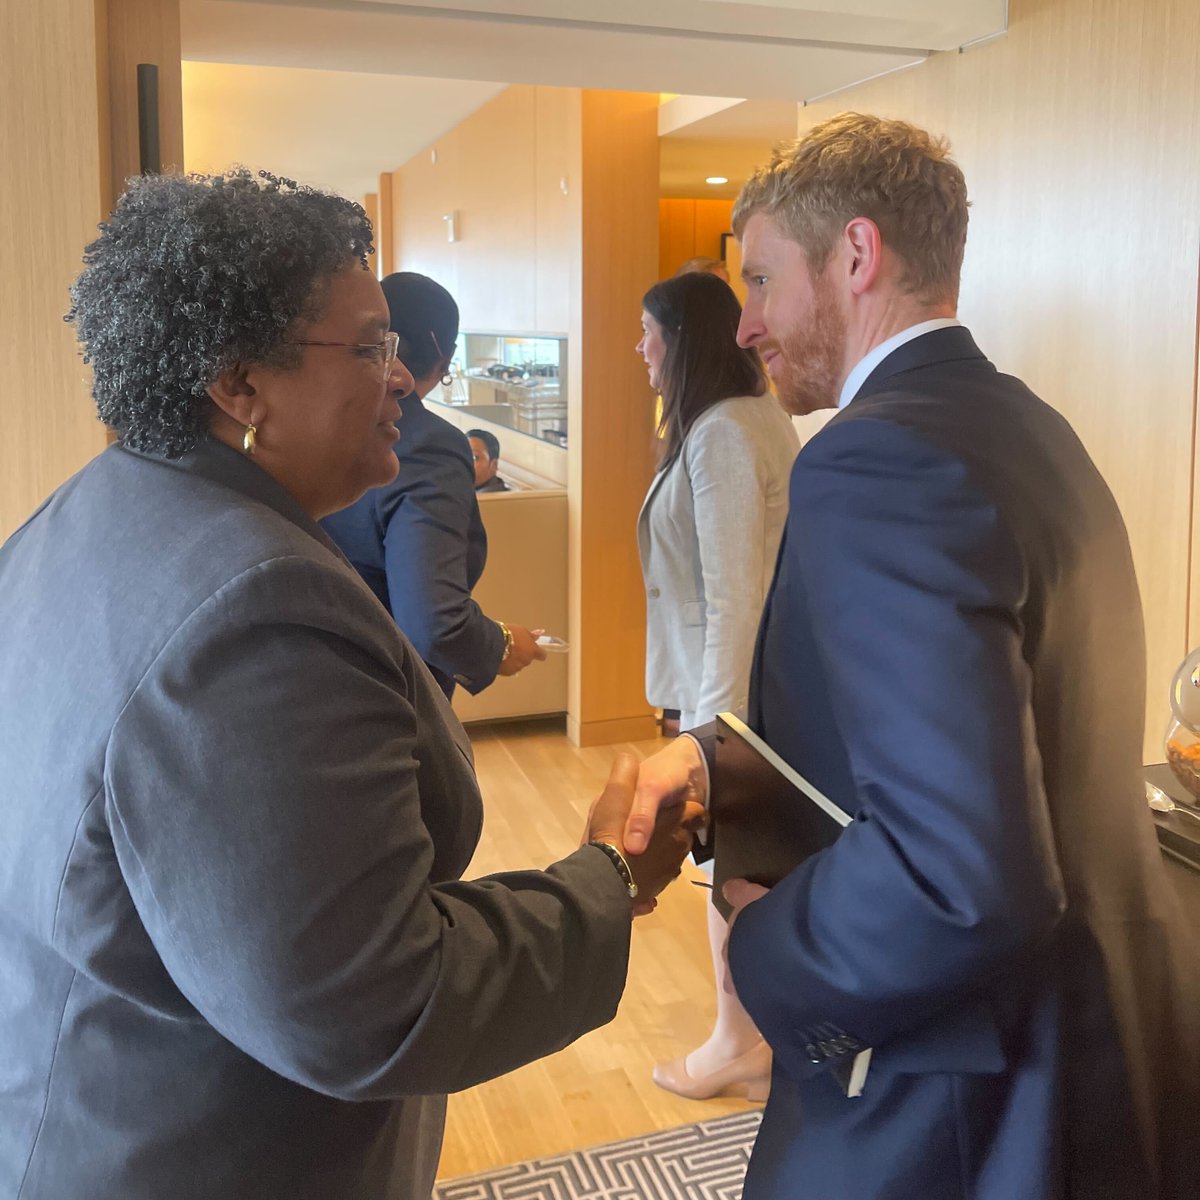 On the sidelines of the @WorldBank Spring Meetings in Washington DC, CGP Chief Executive @RyanHensonUK was delighted to meet with Prime Minister Mia Mottley of Barbados.